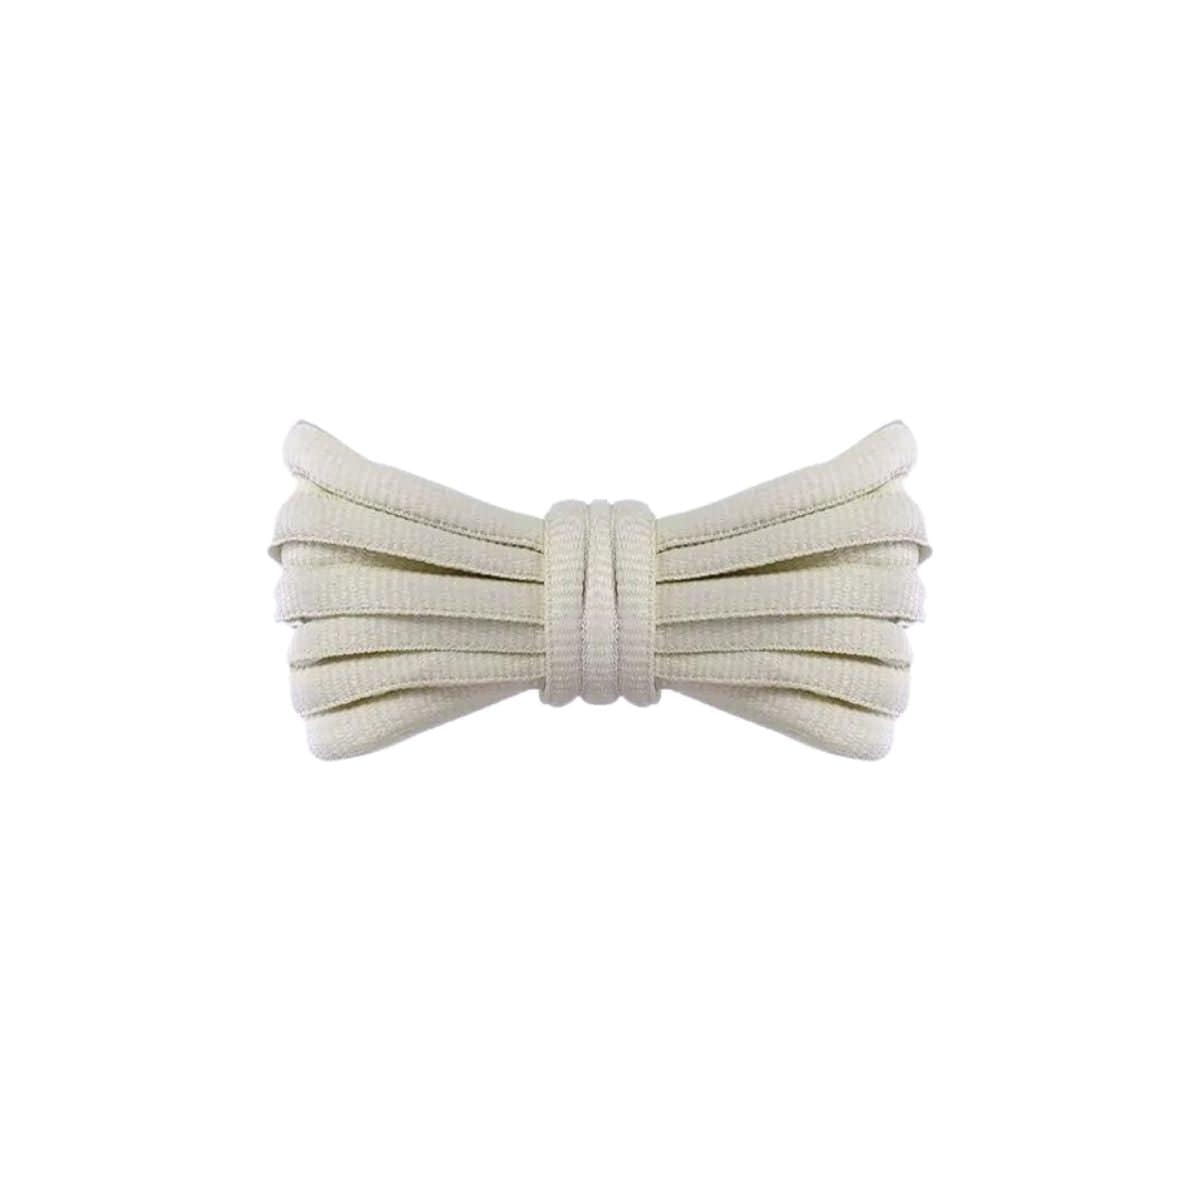 New Balance 1906 Shoe Lace Replacement Off White / 140 CM / 55 IN / Oval / 9mm Shoe Lace Replacement By Kicks Shoelaces